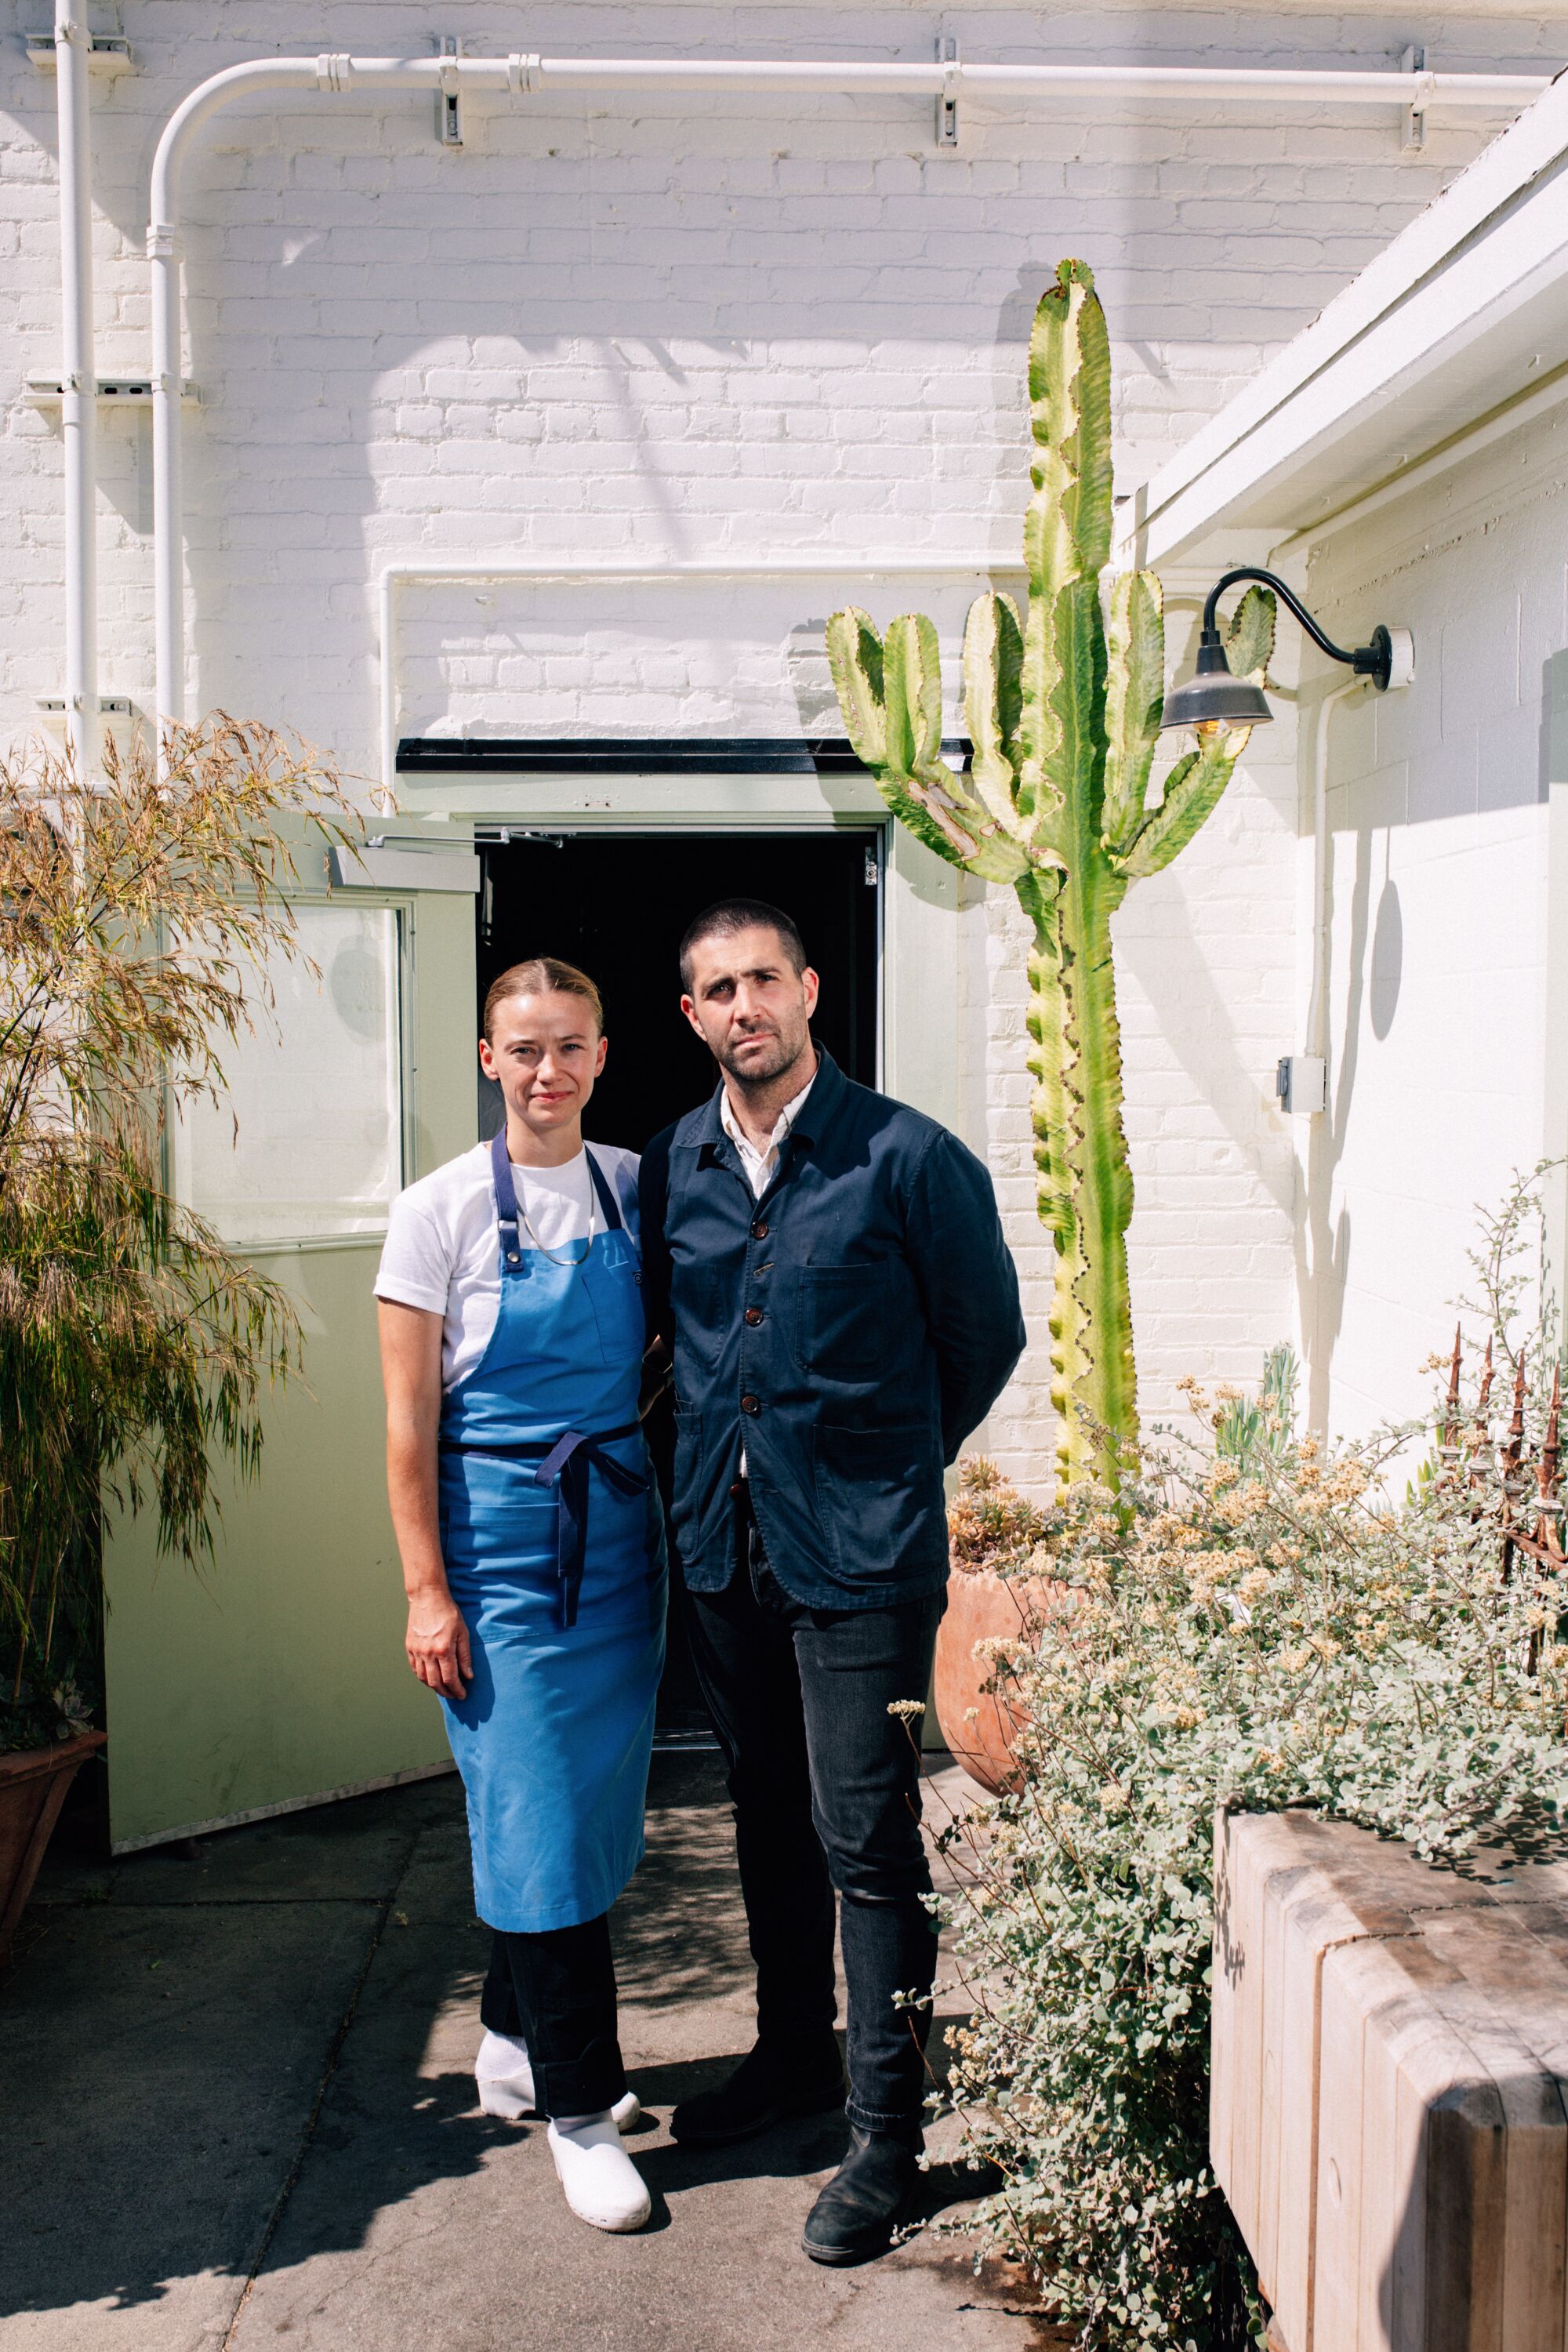 A man and a woman standing outside a white building and some cacti.